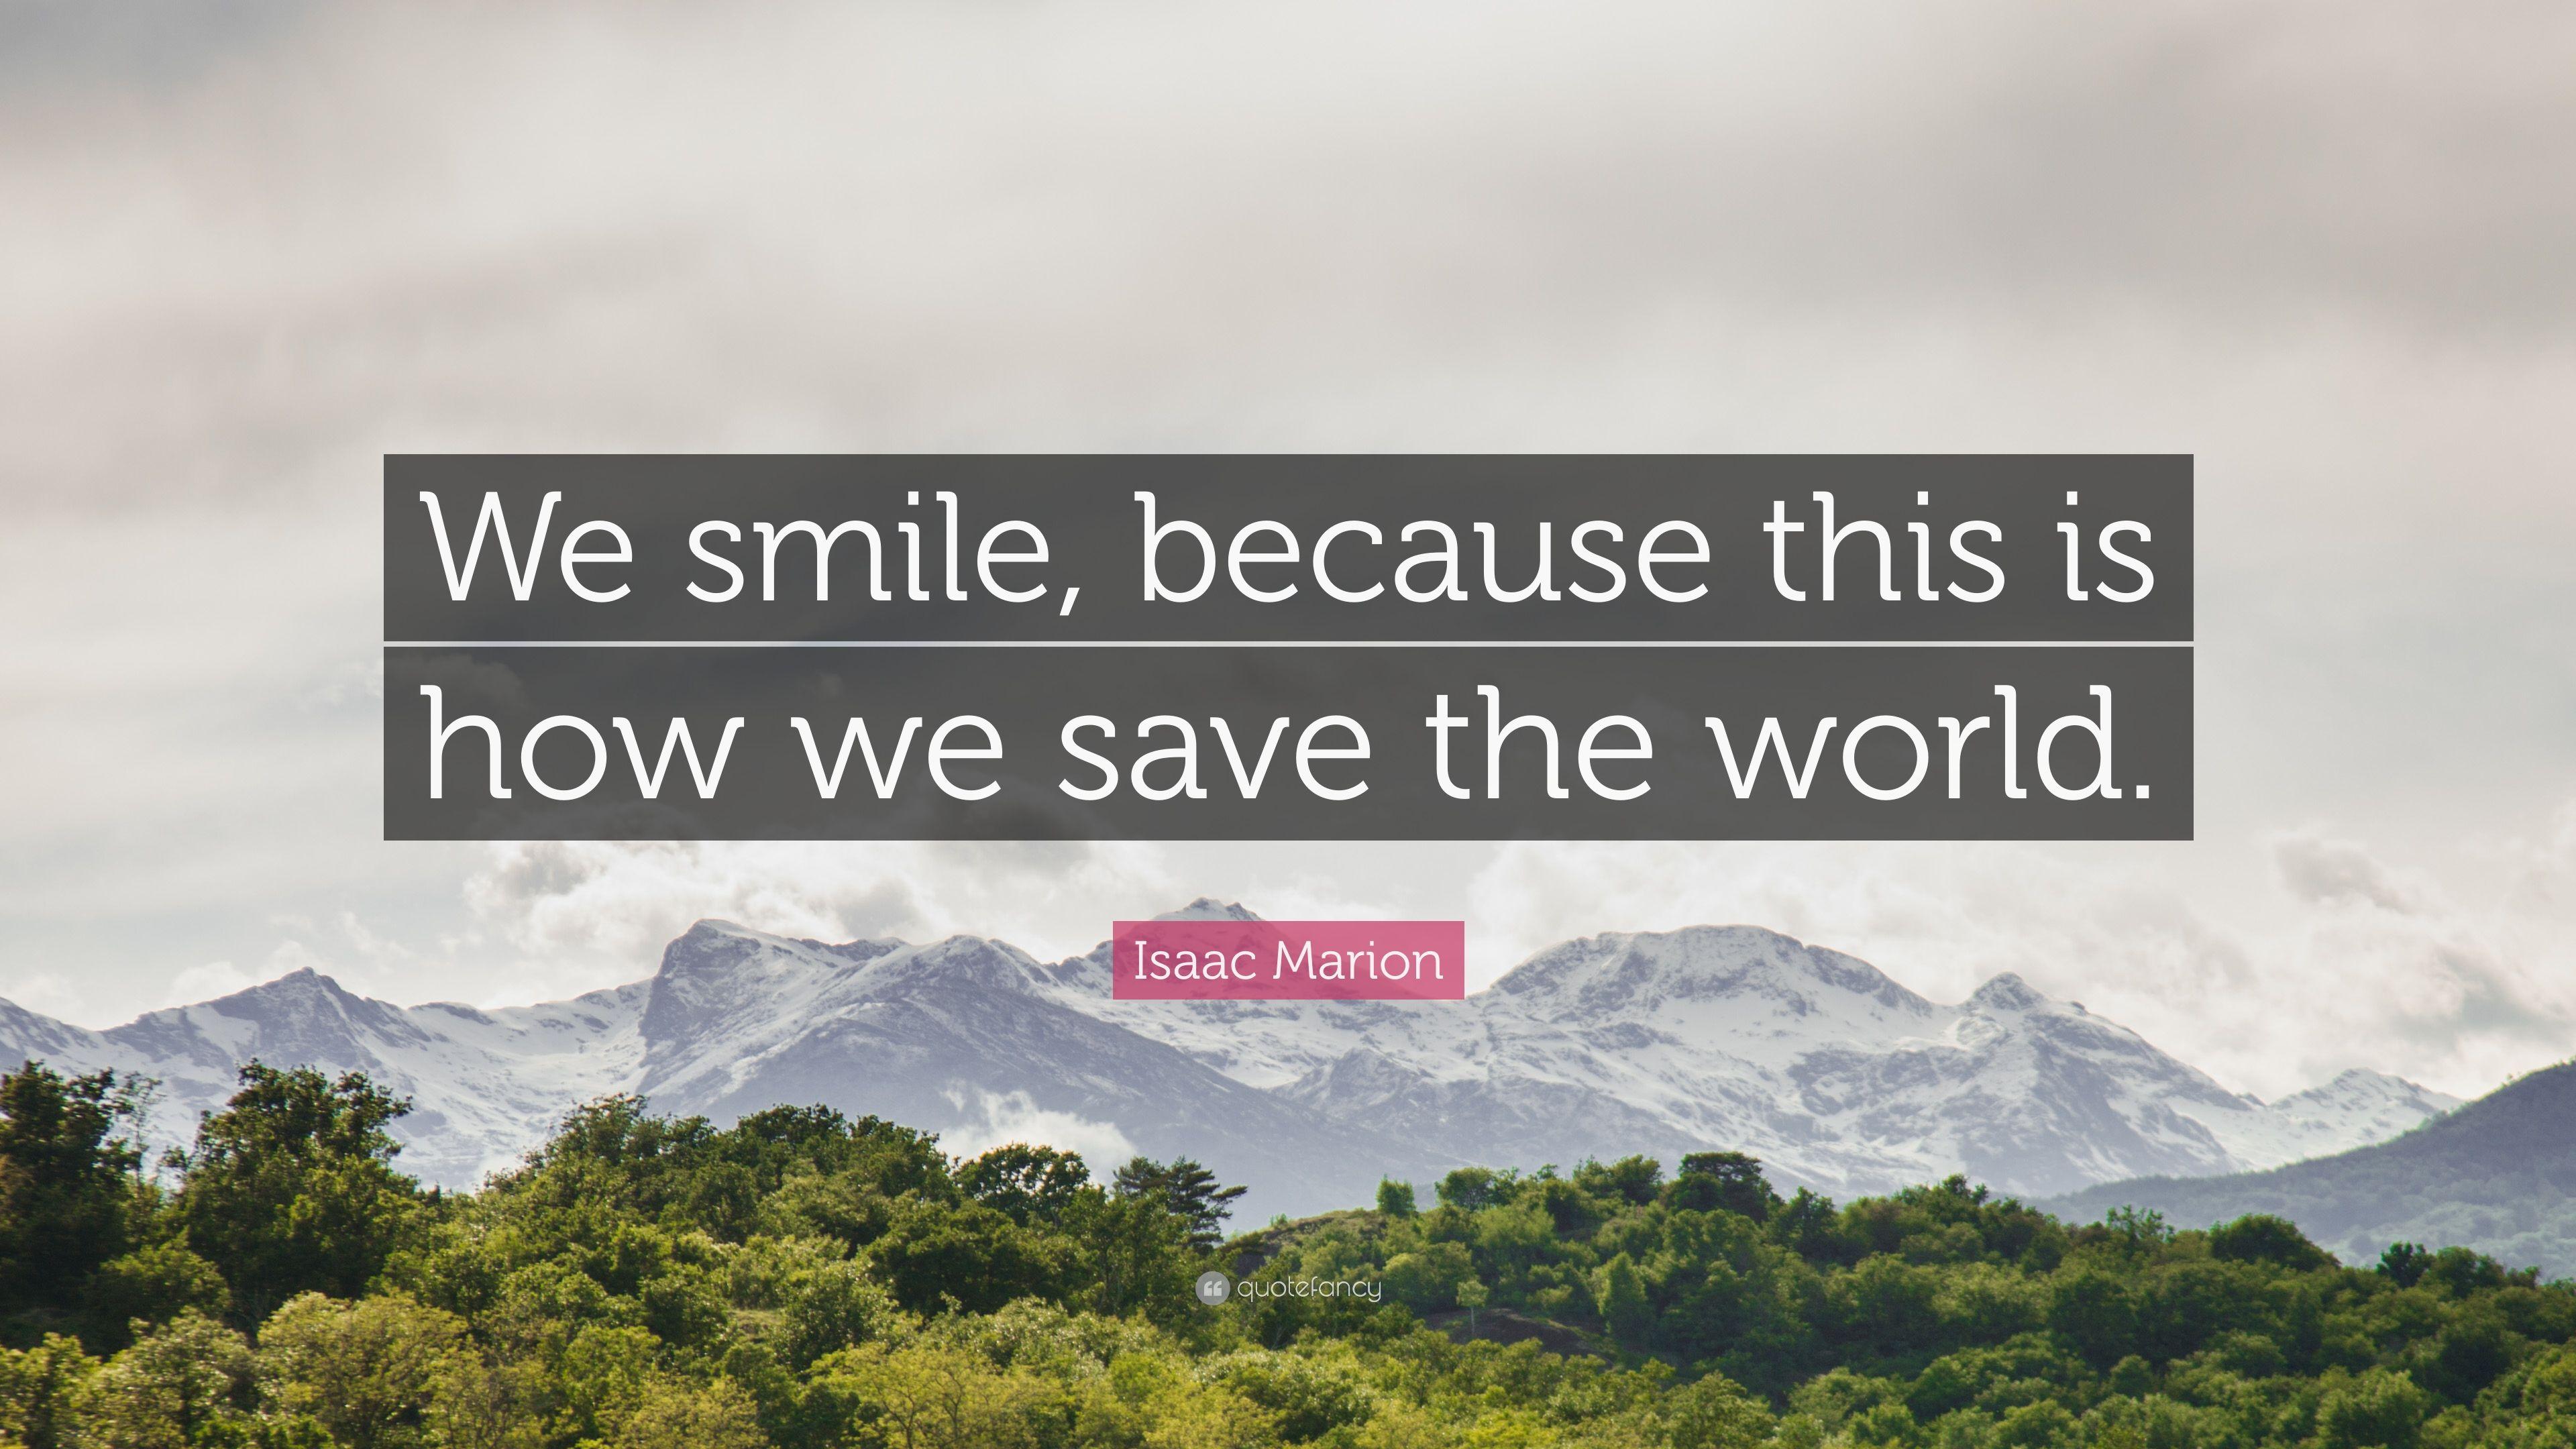 Isaac Marion Quote: “We smile, because this is how we save the world